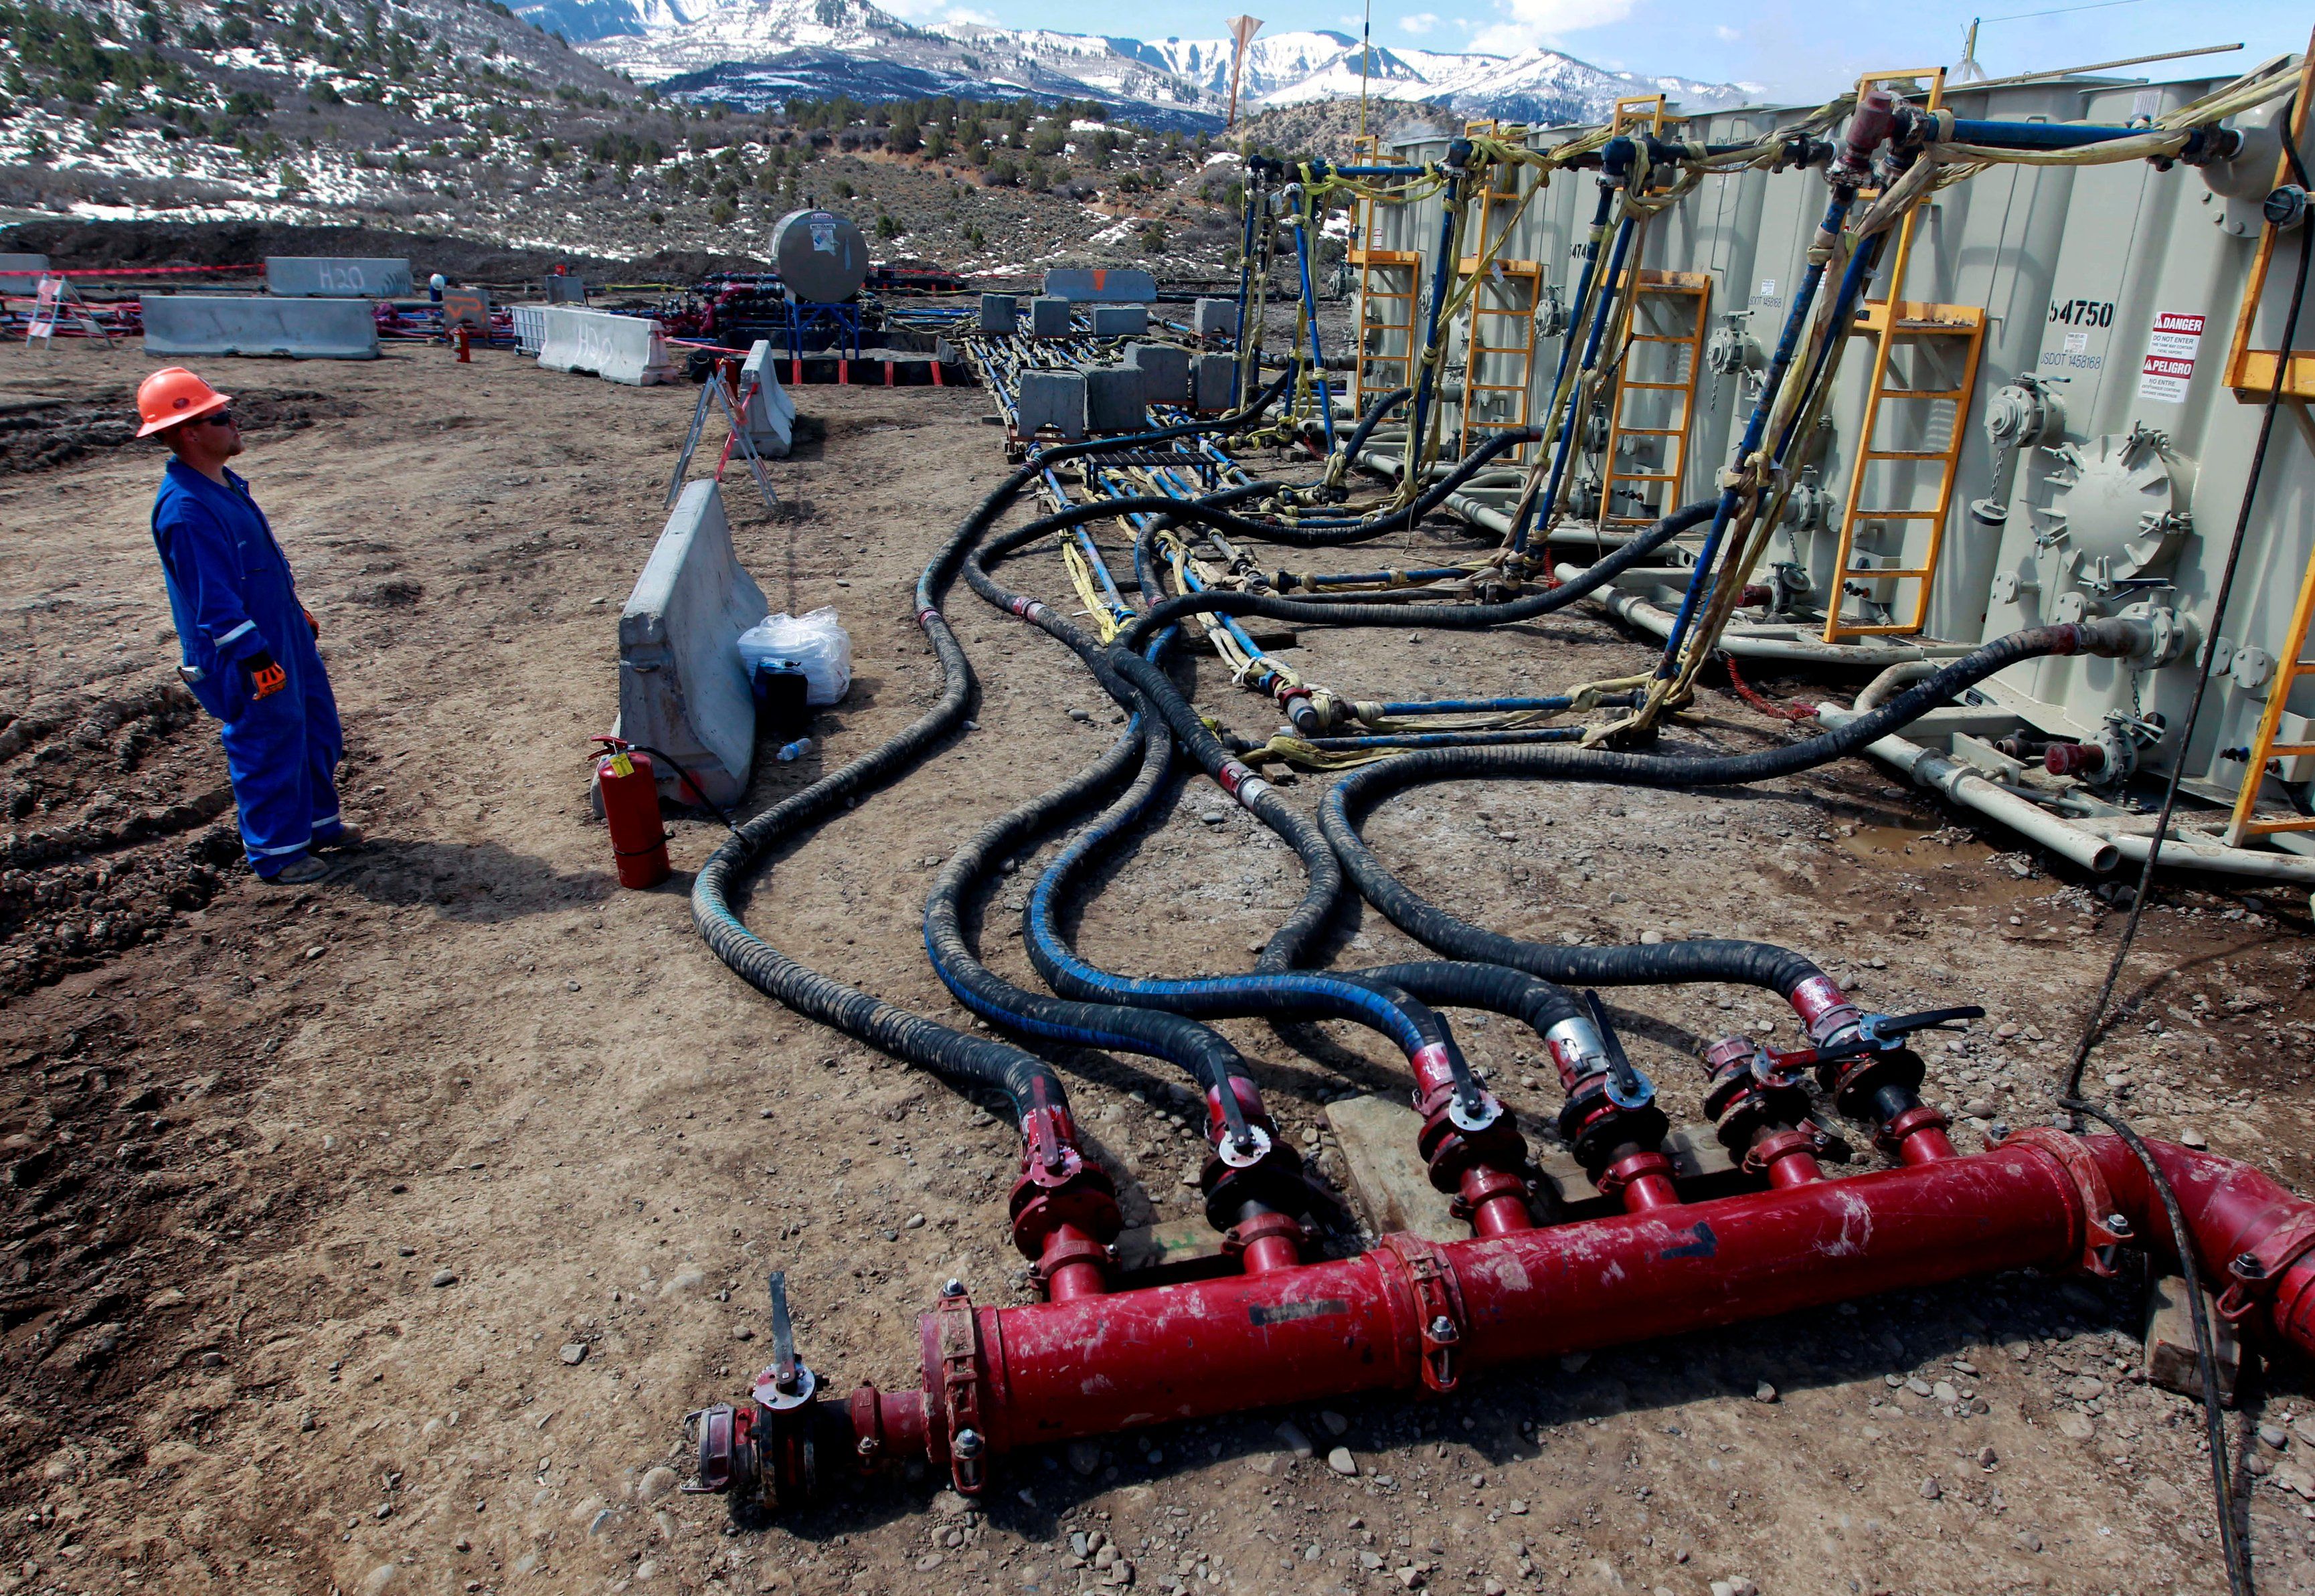 FILE - A worker helps monitor water pumping pressure and temperature at an oil and natural gas extraction site in Colorado, March 29, 2013.A Trump administration national security official has sought help from advisers to a think tank that disavows climate change to challenge widely accepted scientific findings on global warming, according to his emails. 